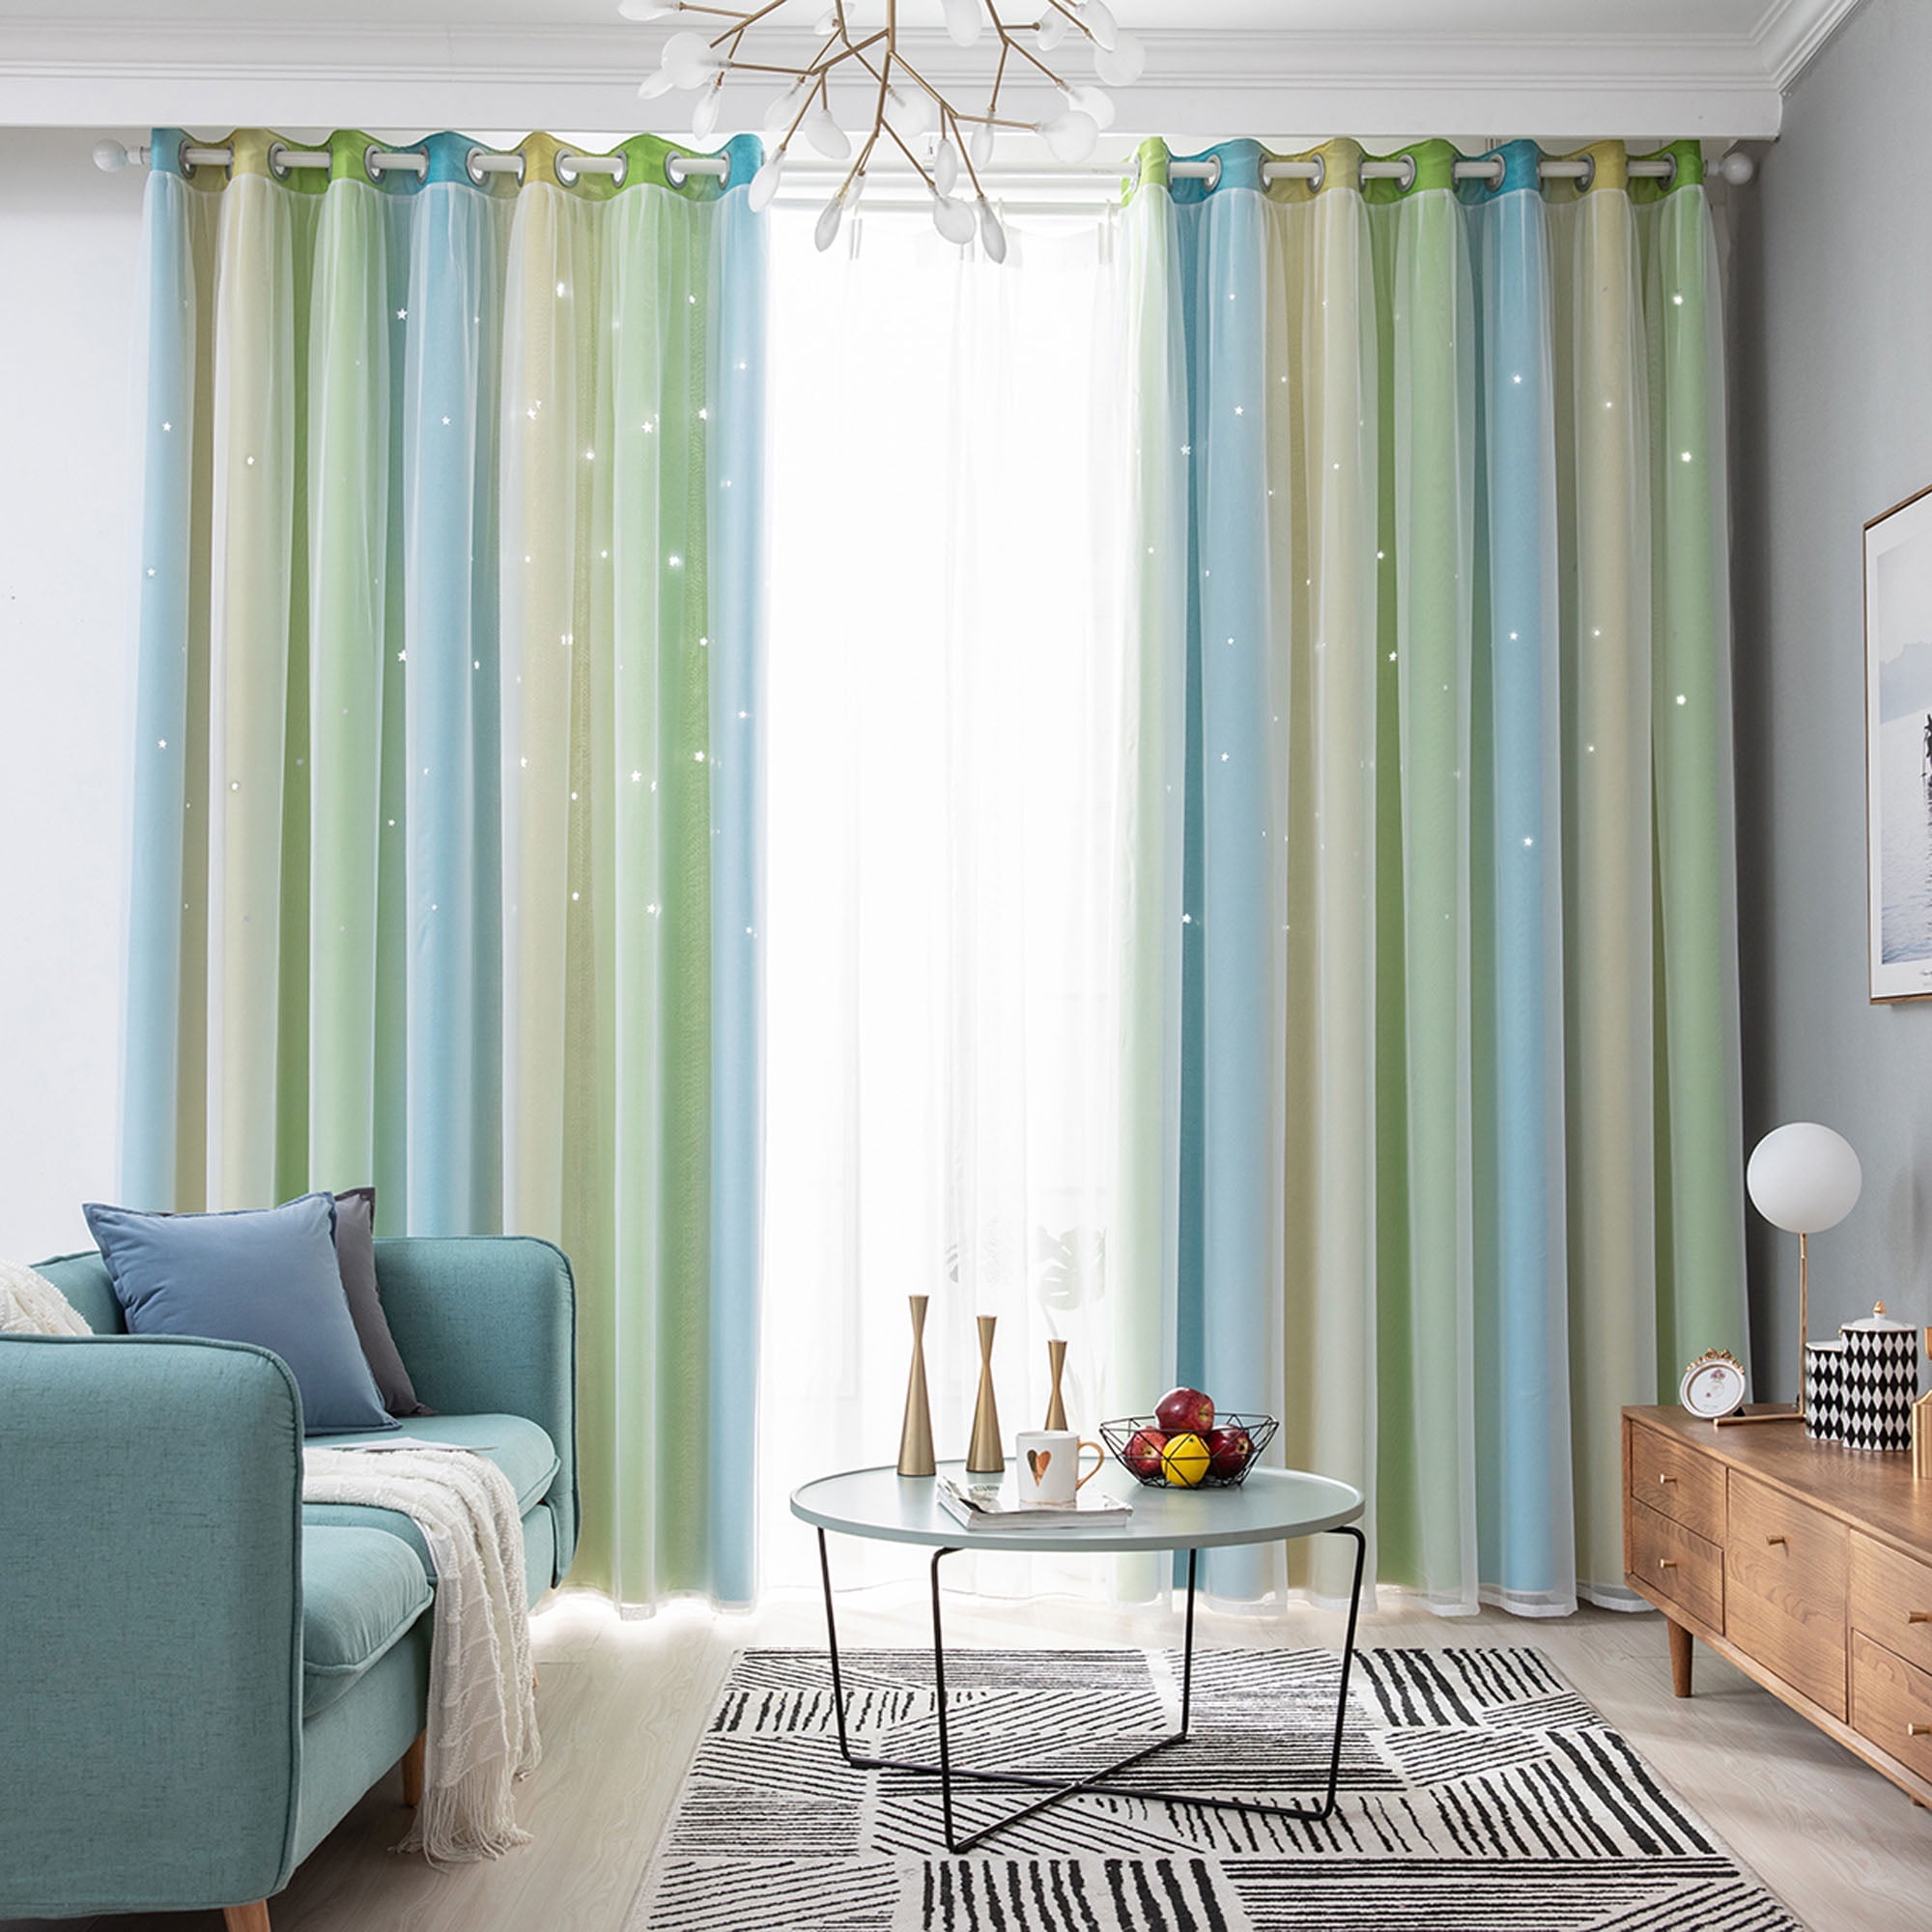 Details about   H.VERSAILTEX Blackout Curtains Kids Room Thermal Insulated Twinkle Stars Printed 